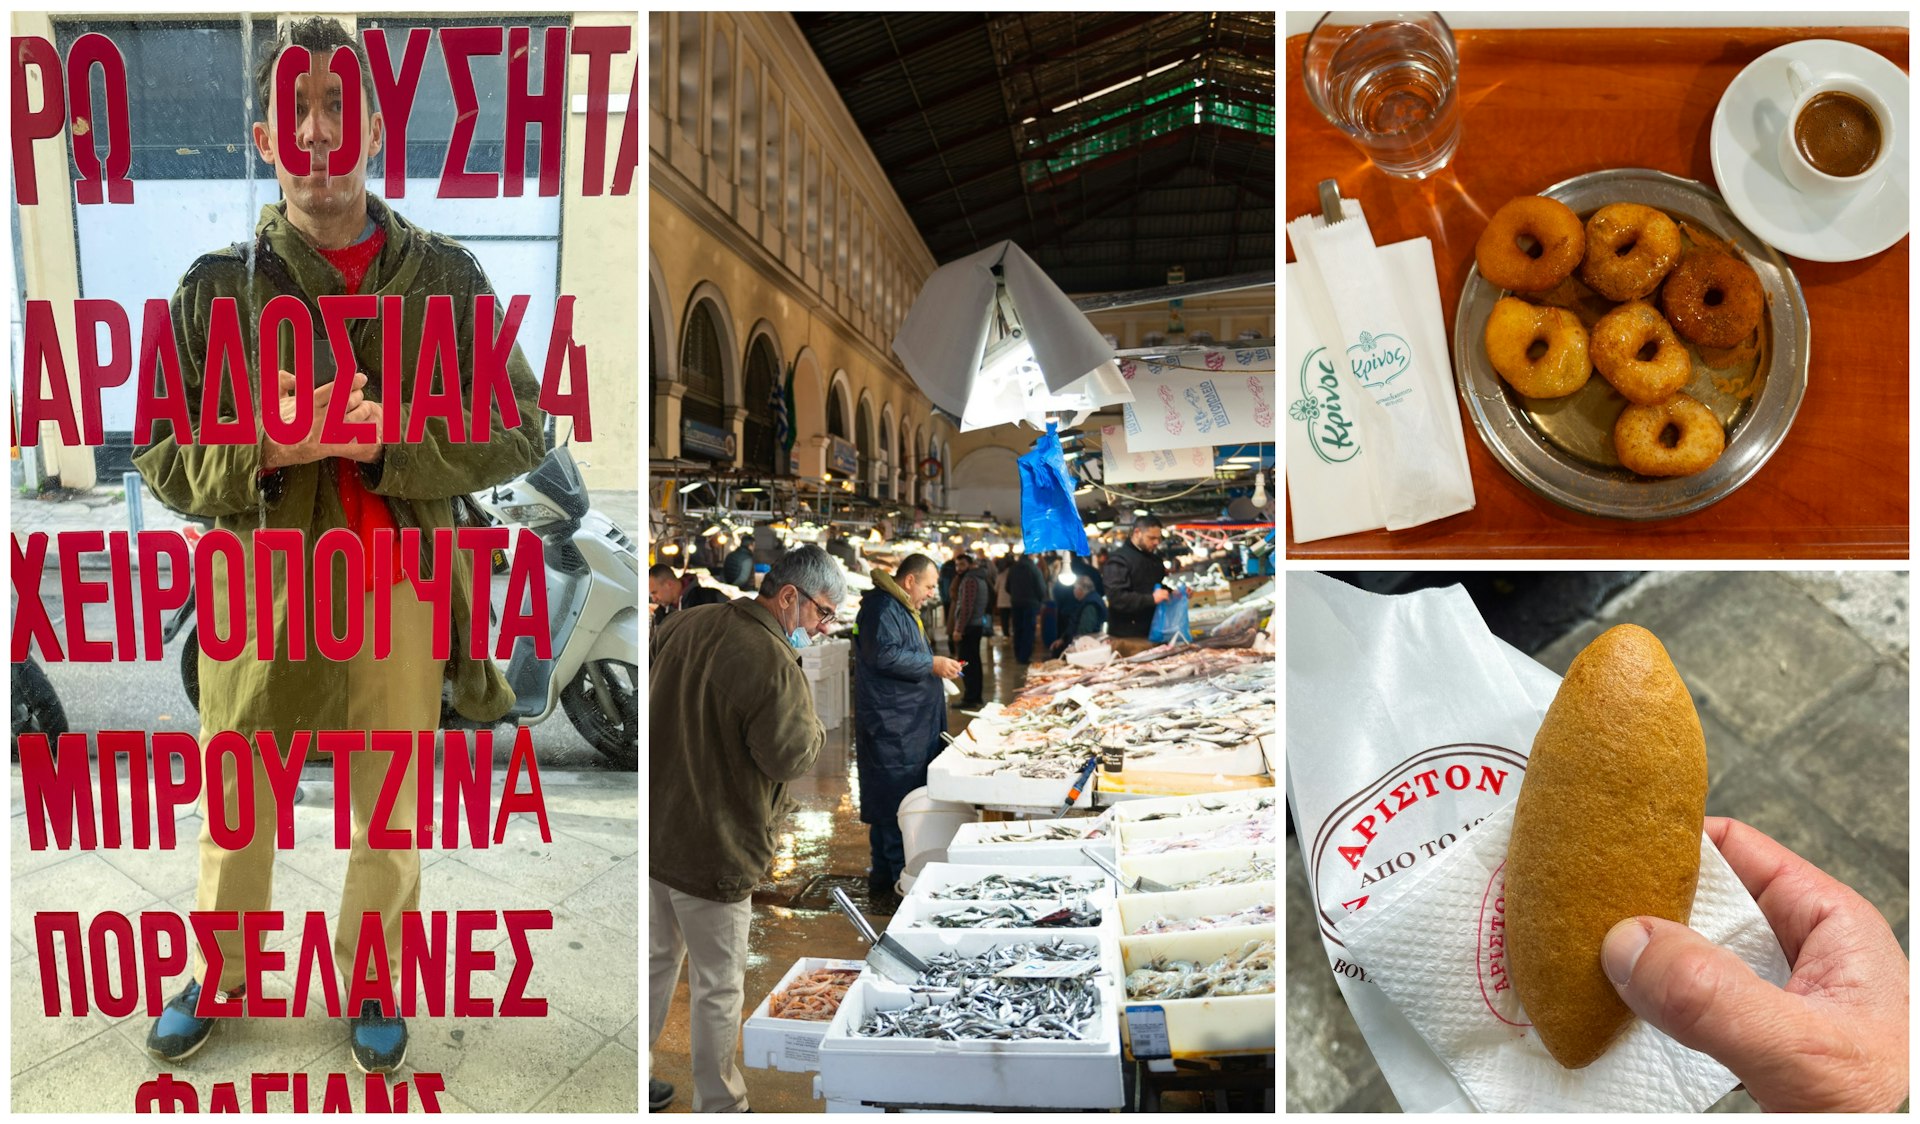 Collage of images including Greek donuts, an Athens indoor food market and a photo of the writer standing in front of a mirror with Greek text